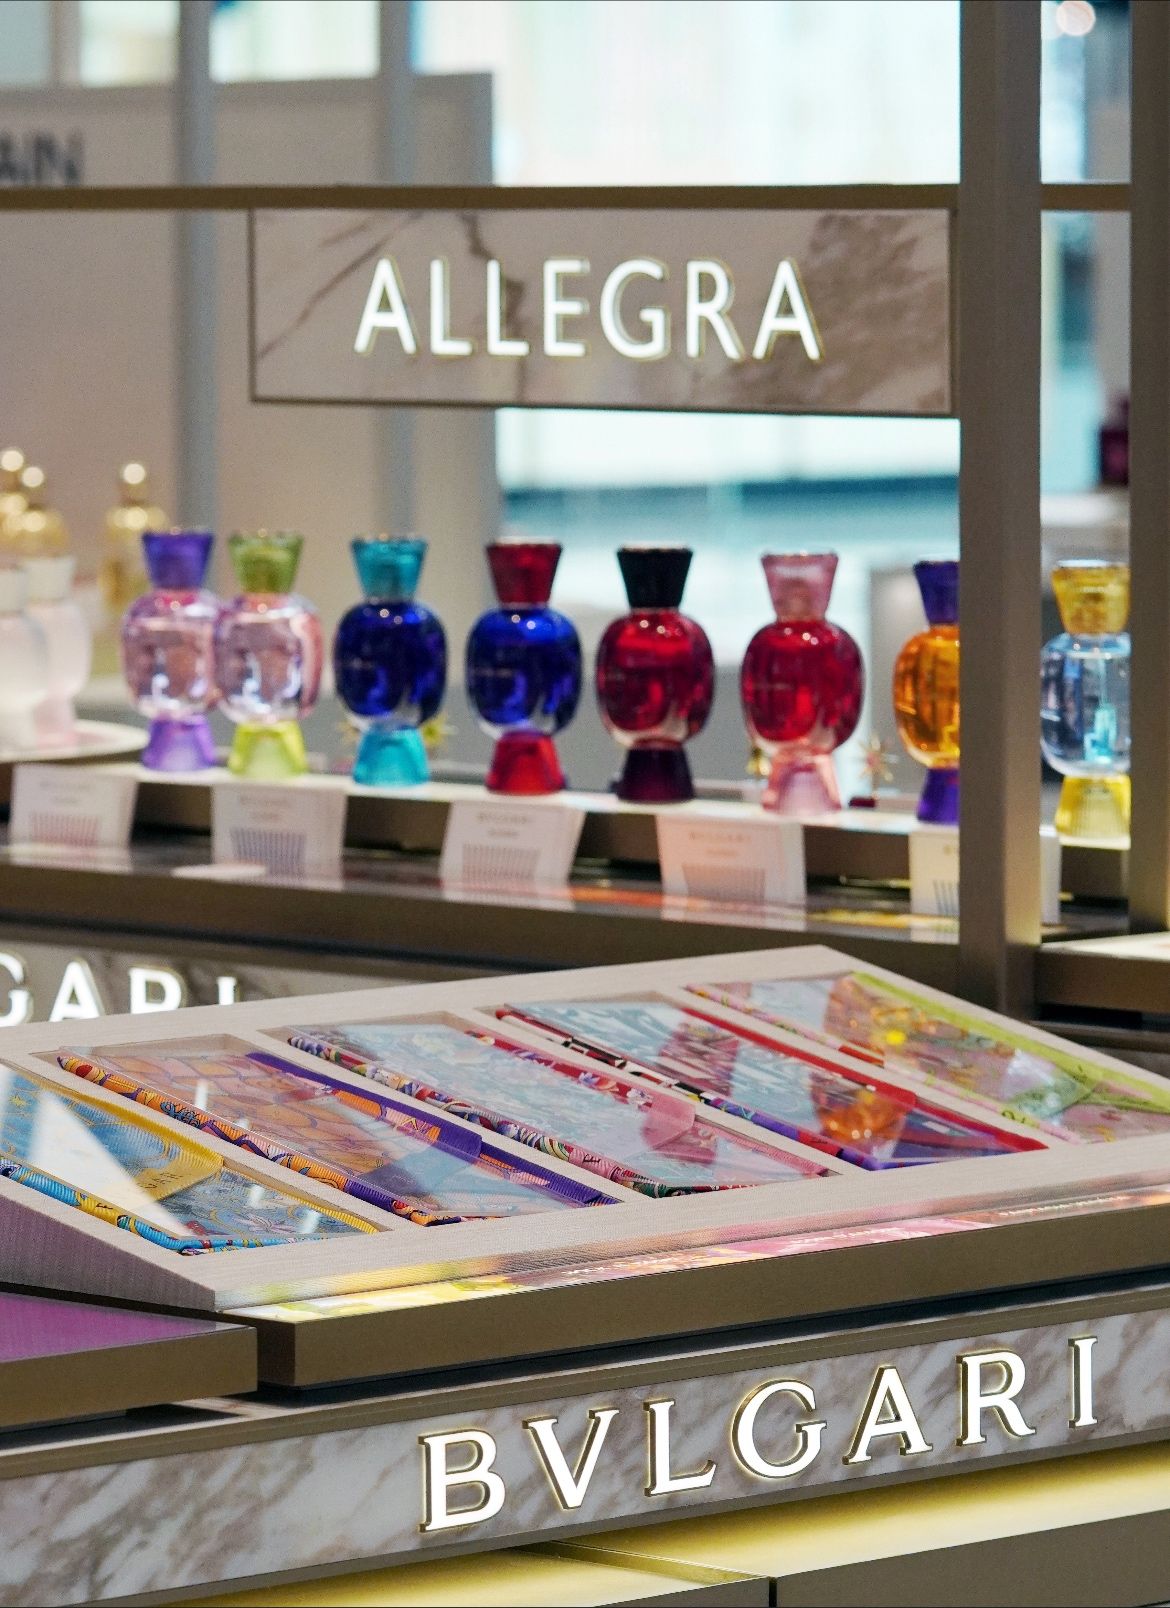 Bvlgari partners with Bahrain Duty Free to launch a new perfume kiosk (2)